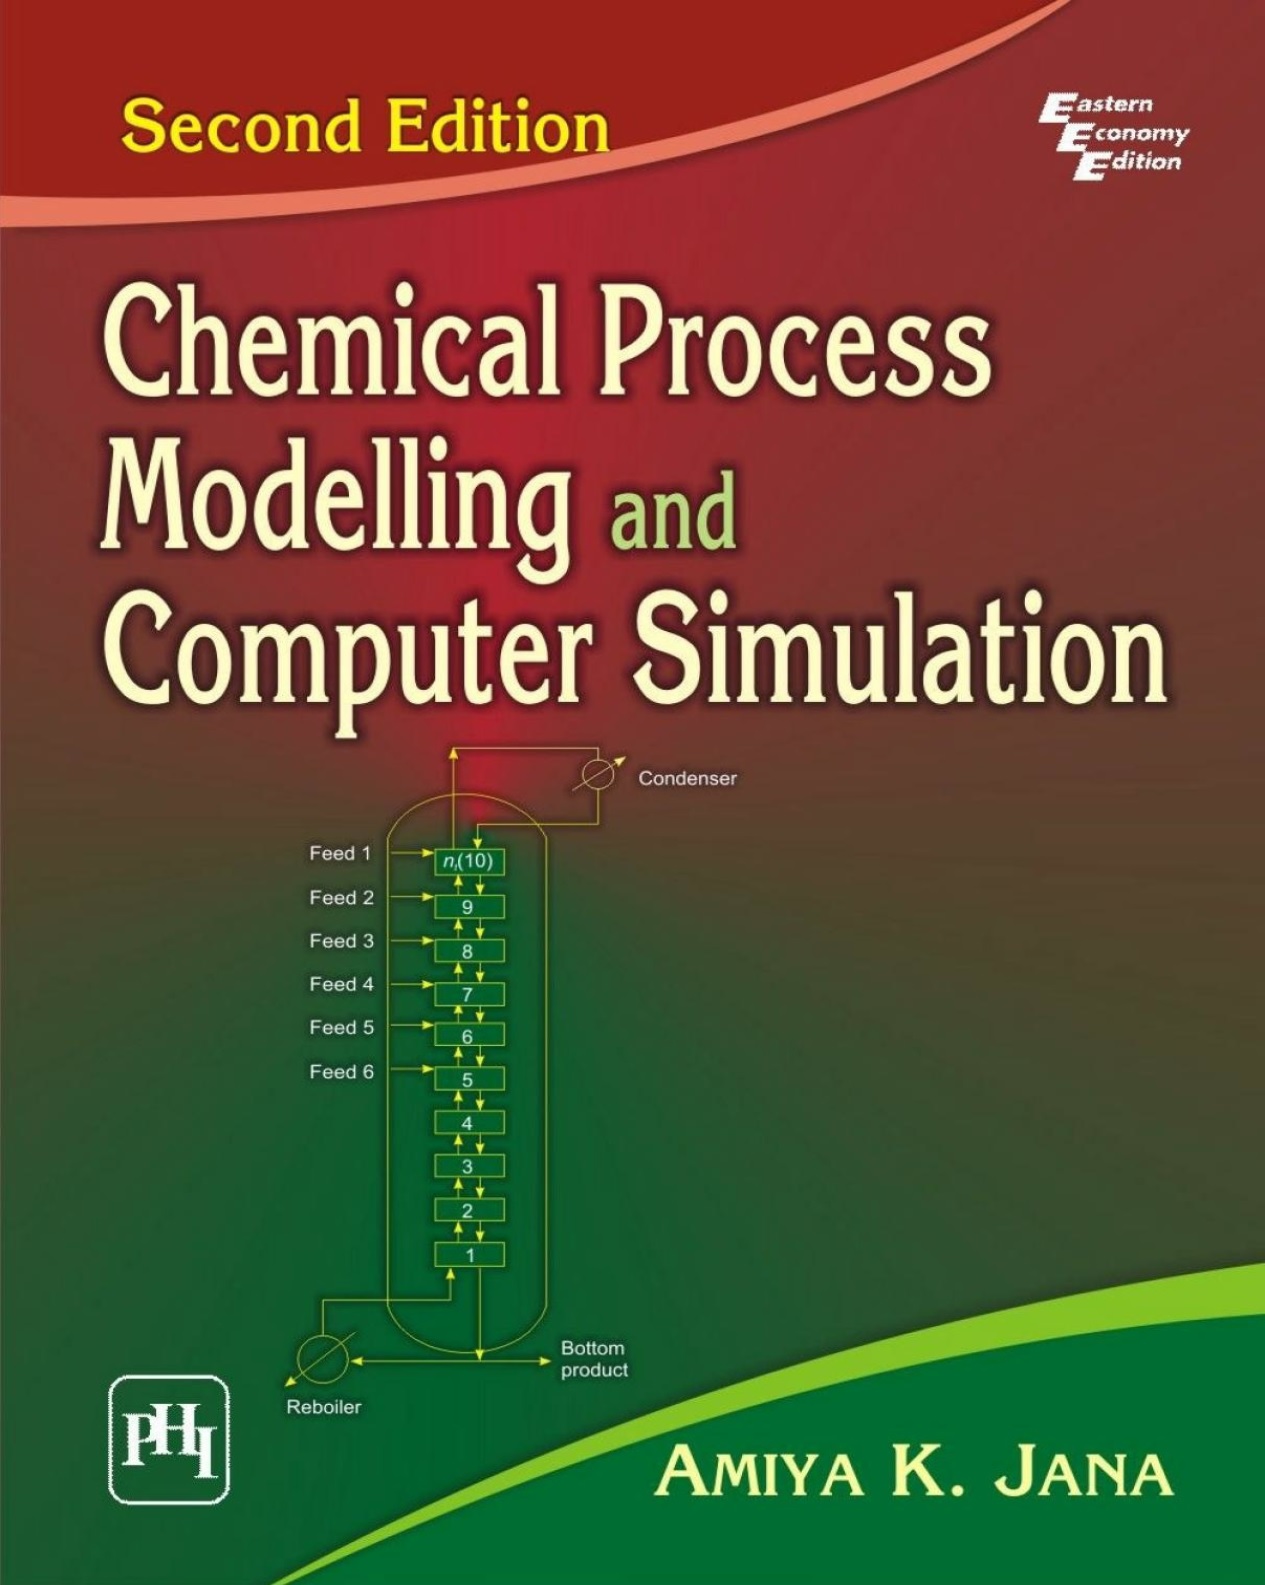 engineering-library-ebooks-chemical-process-modelling-and-computer-simulation-2nd-edition